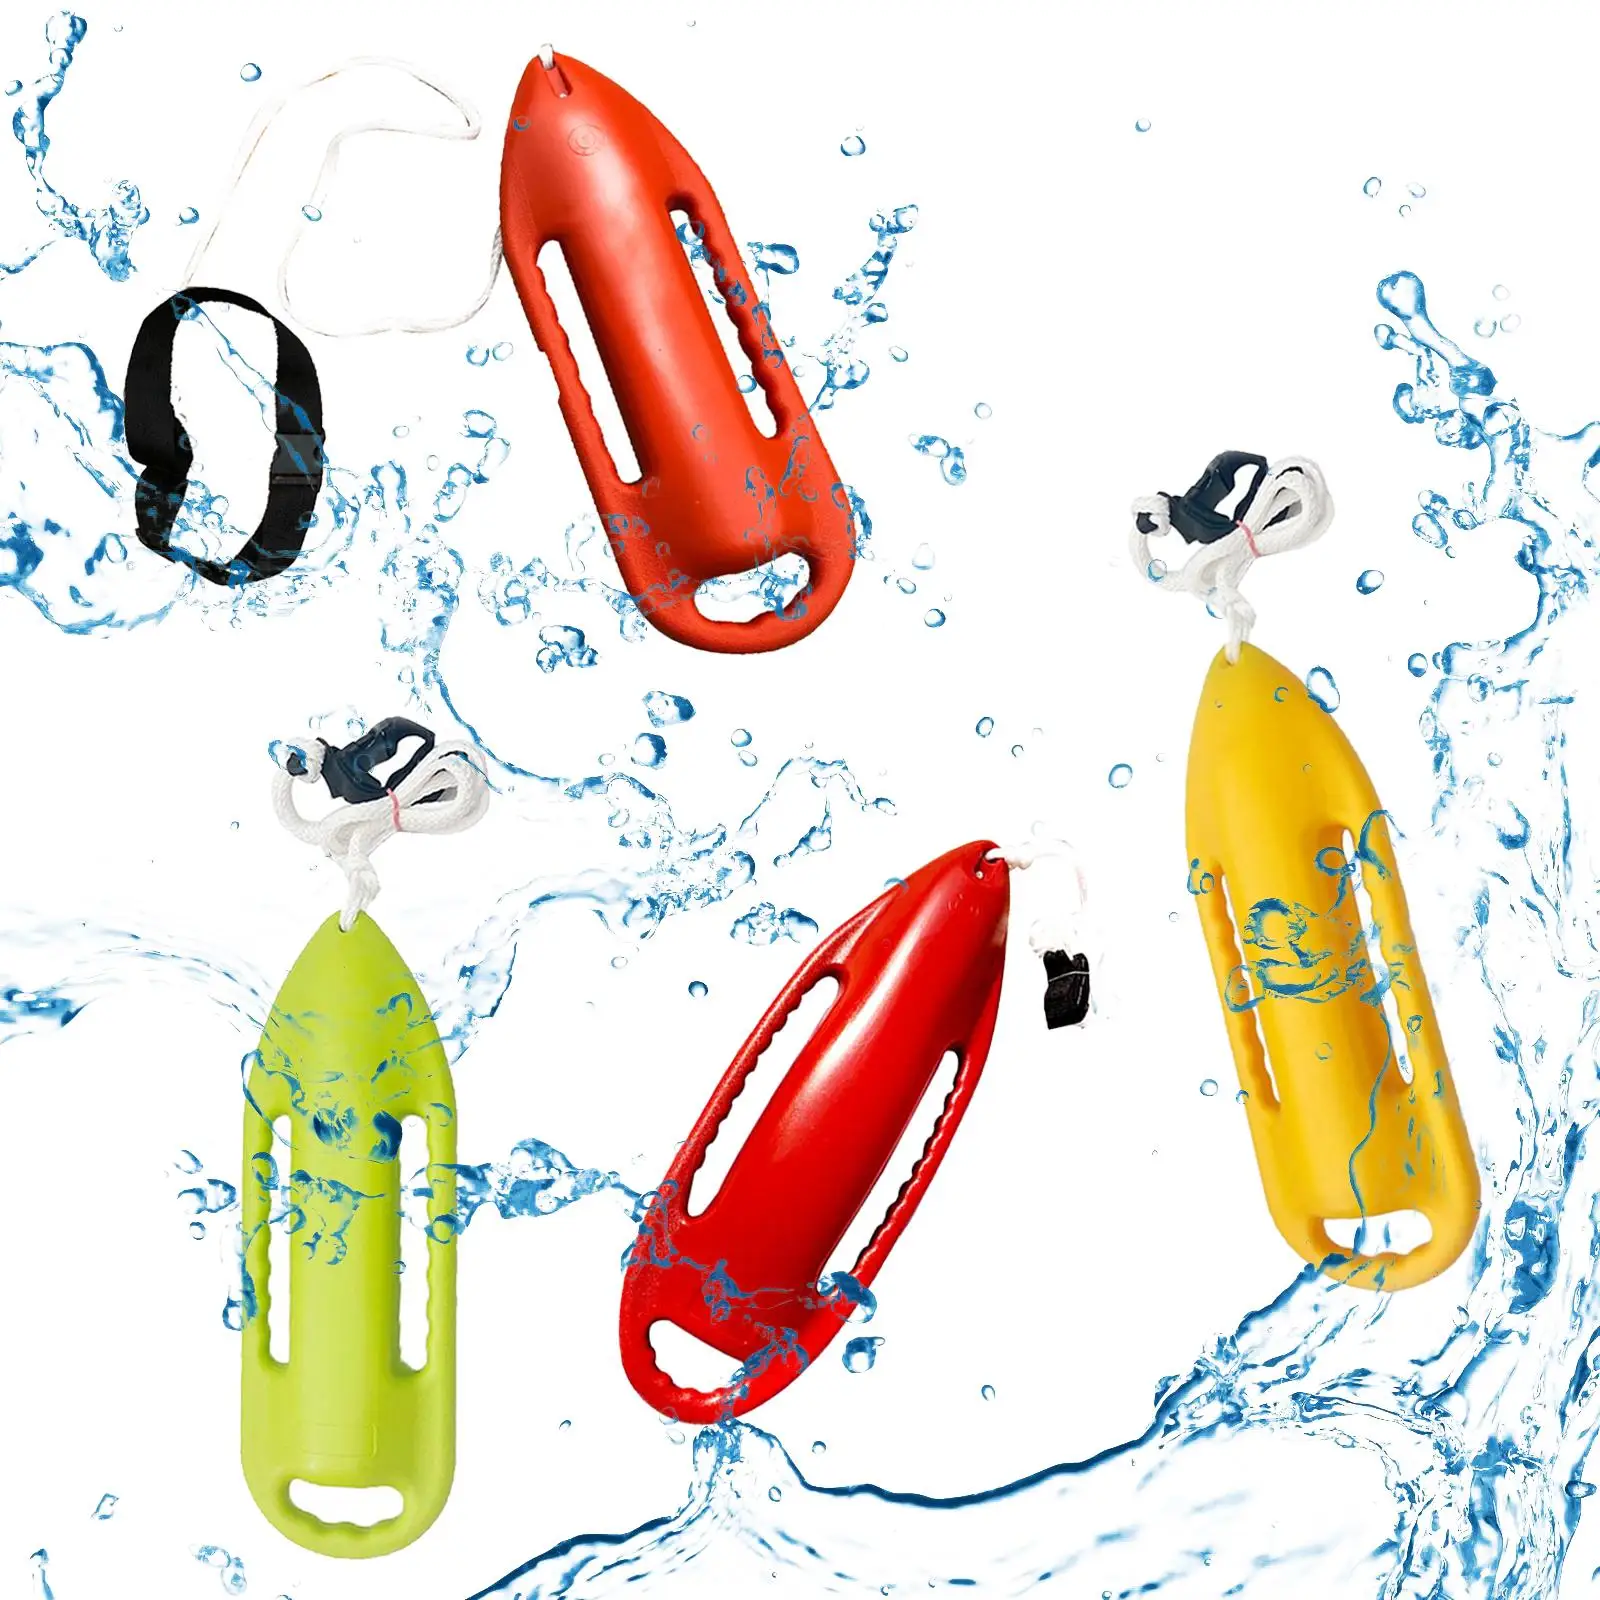 Swimming Can Lightweight Float Swimming Buoy for Rafting, Surfing, Snorkeling